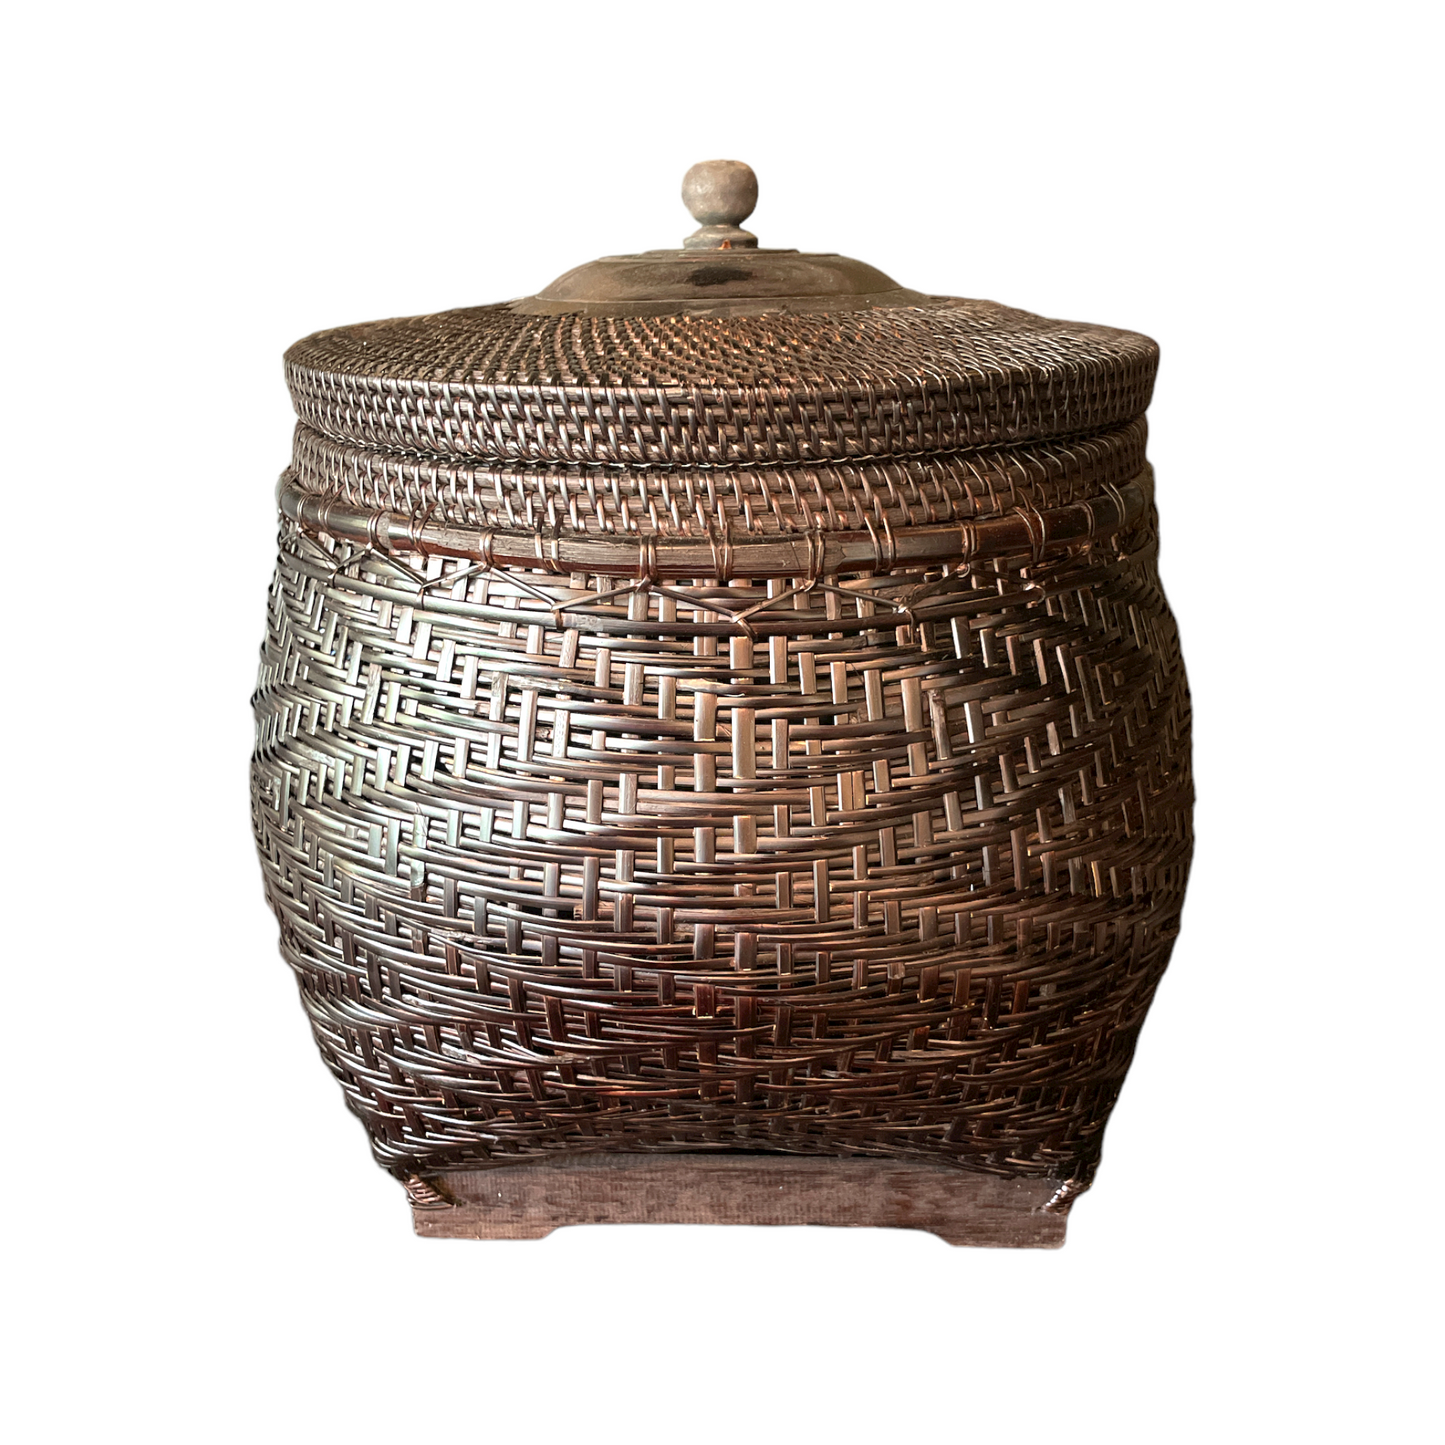 Crafted by skilled artisans from East Indonesian Island Villages using locally-sourced rattan and bamboo, the Cahyono Handmade Rattan & Bamboo Basket is visually stunning and exceptionally functional. Their deep, rich brown and black colour is complemented by a sturdy lid and wooden handle, making them the perfect choice for decorative accents or convenient storage solutions. Front.